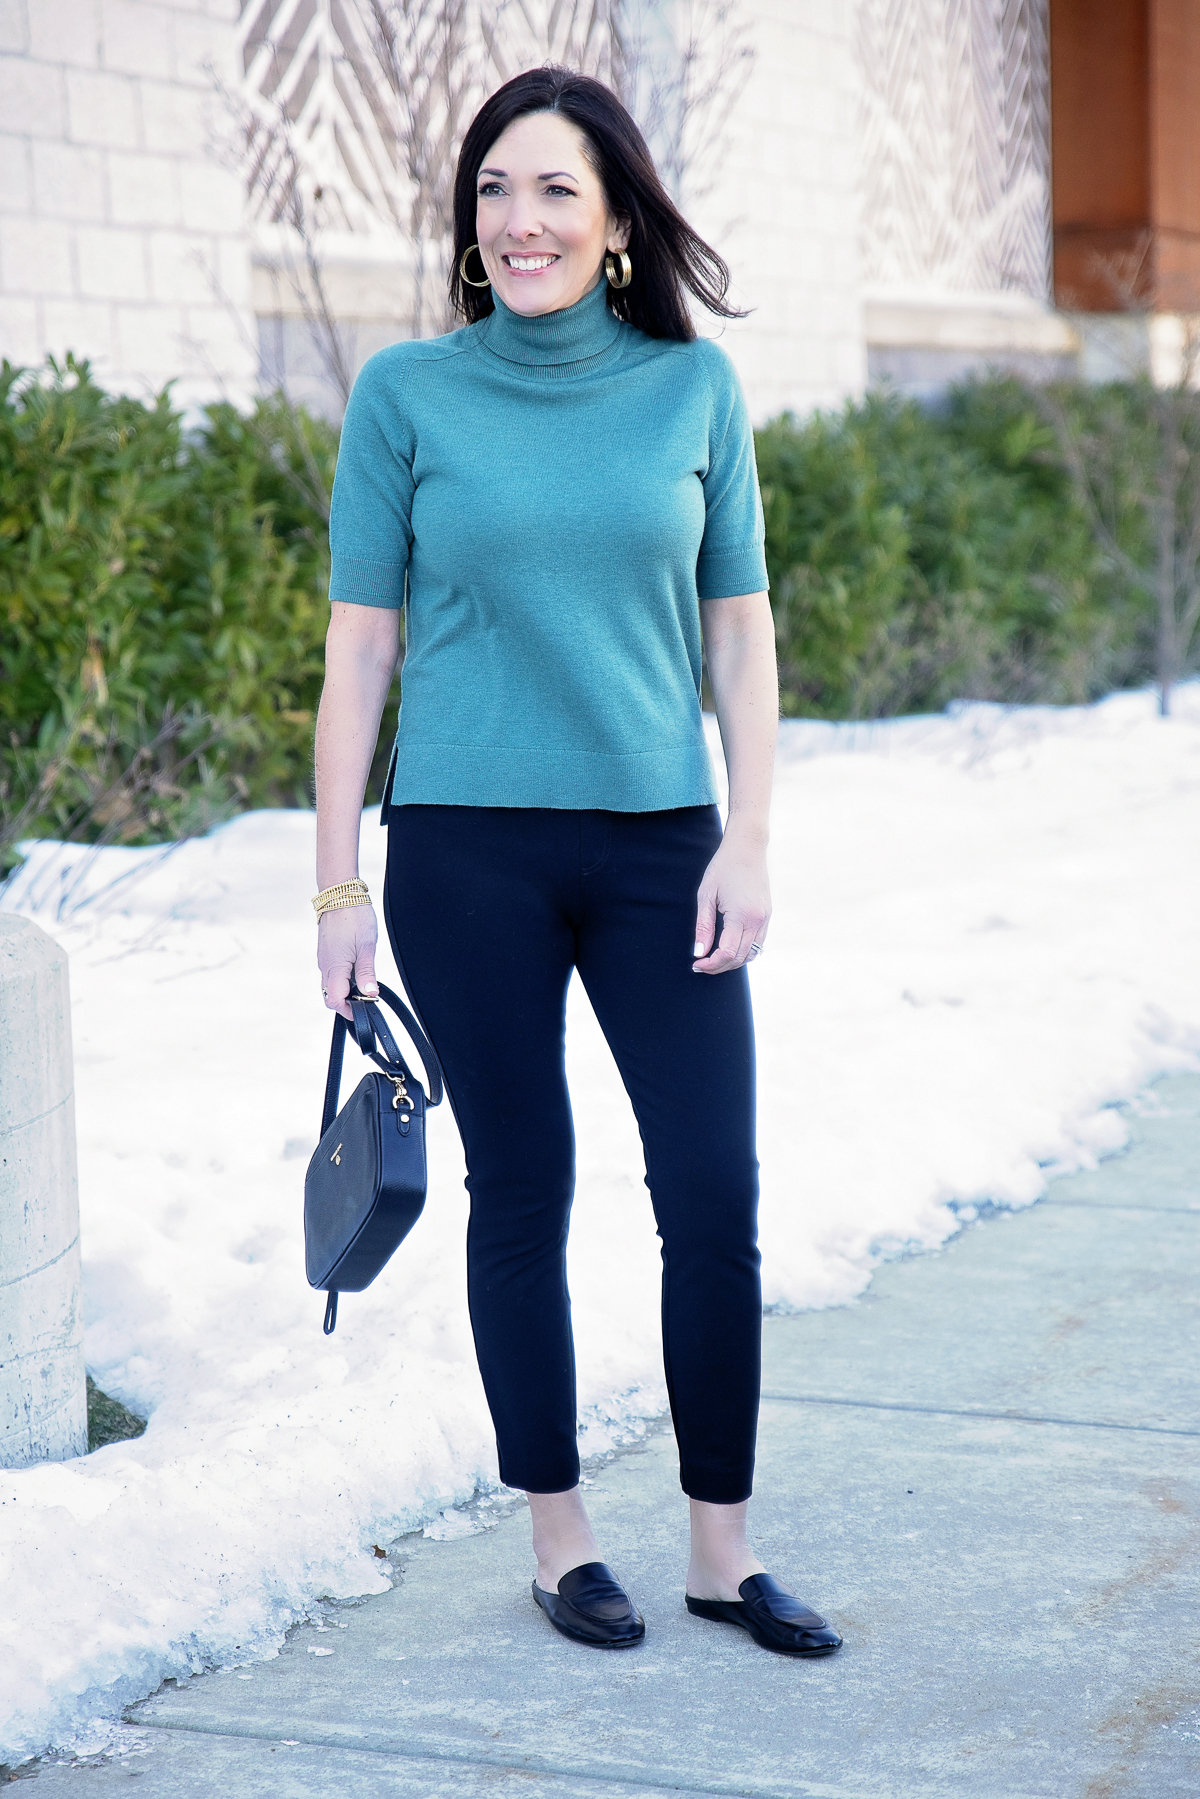 Spring Work Wear Look with a Teal Turtleneck Tee